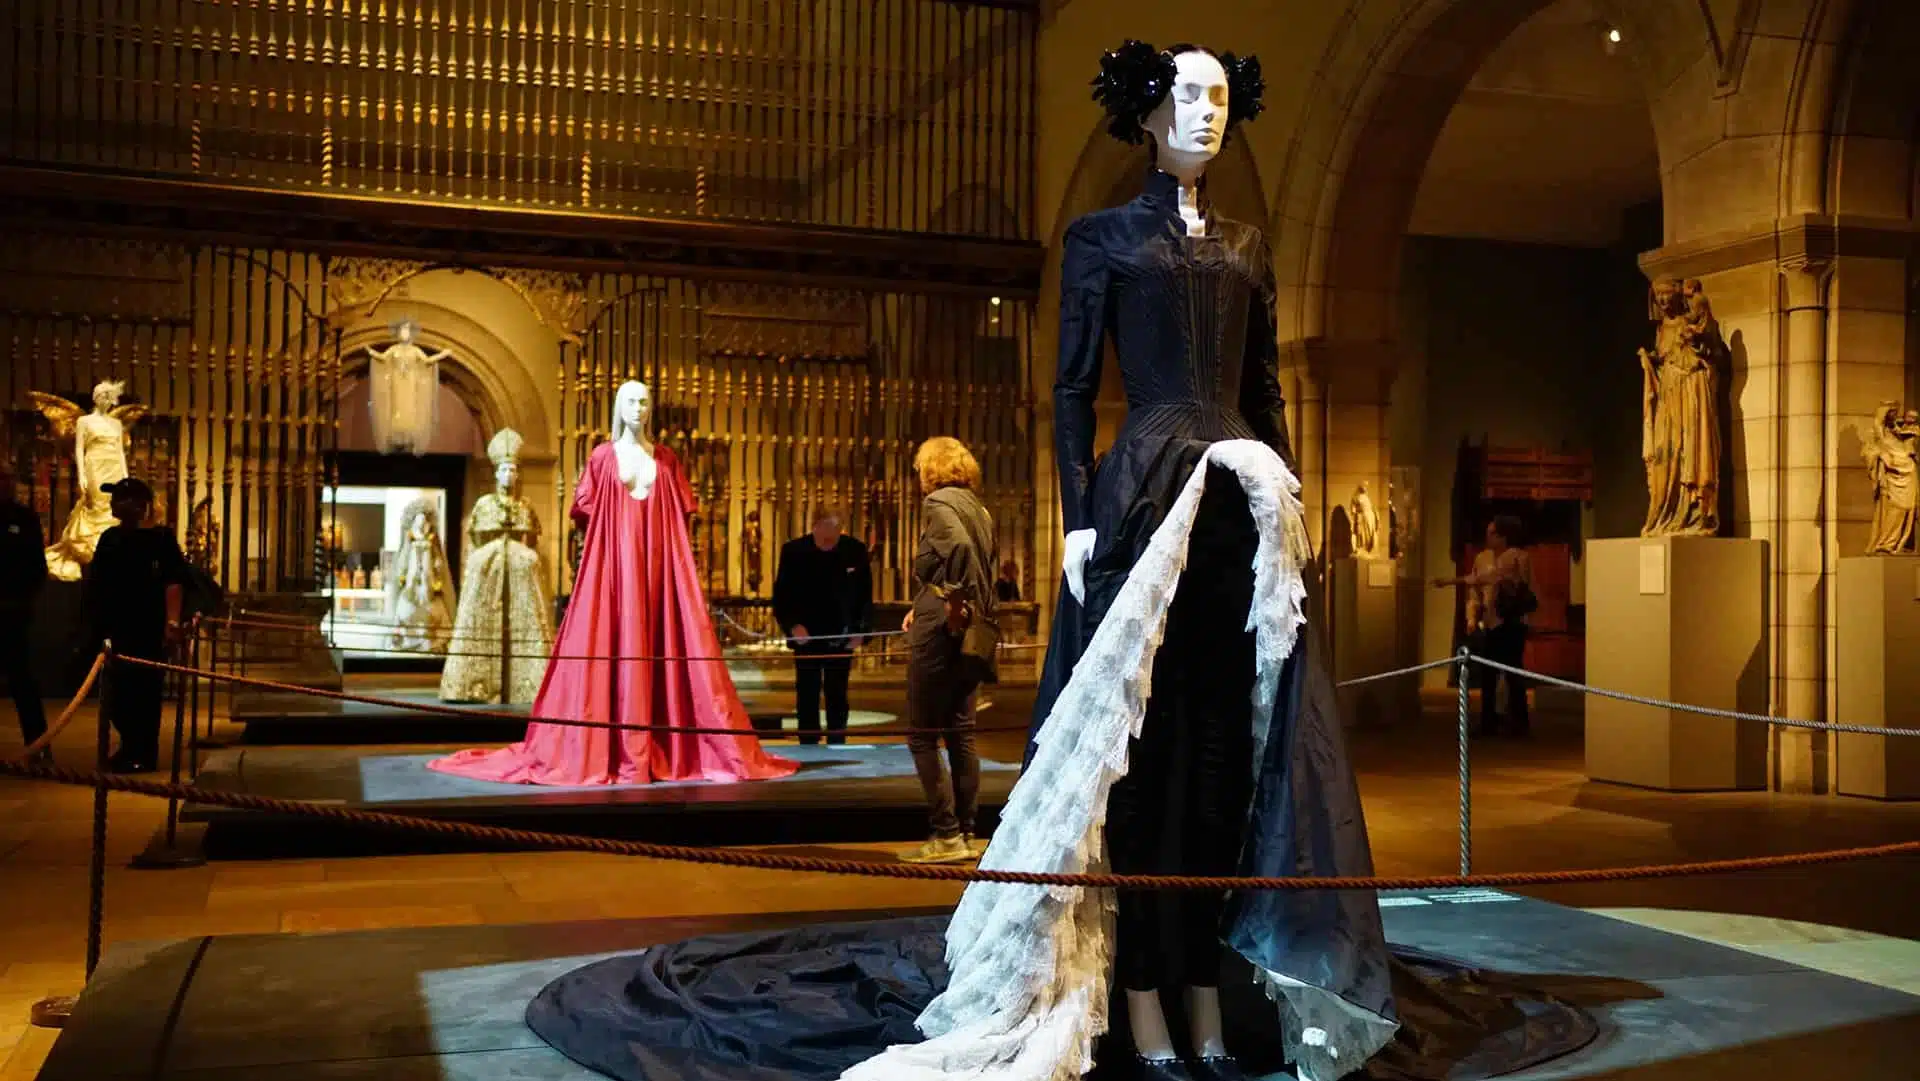 Frame by frame, the Met gala exhibition highlights American fashion.